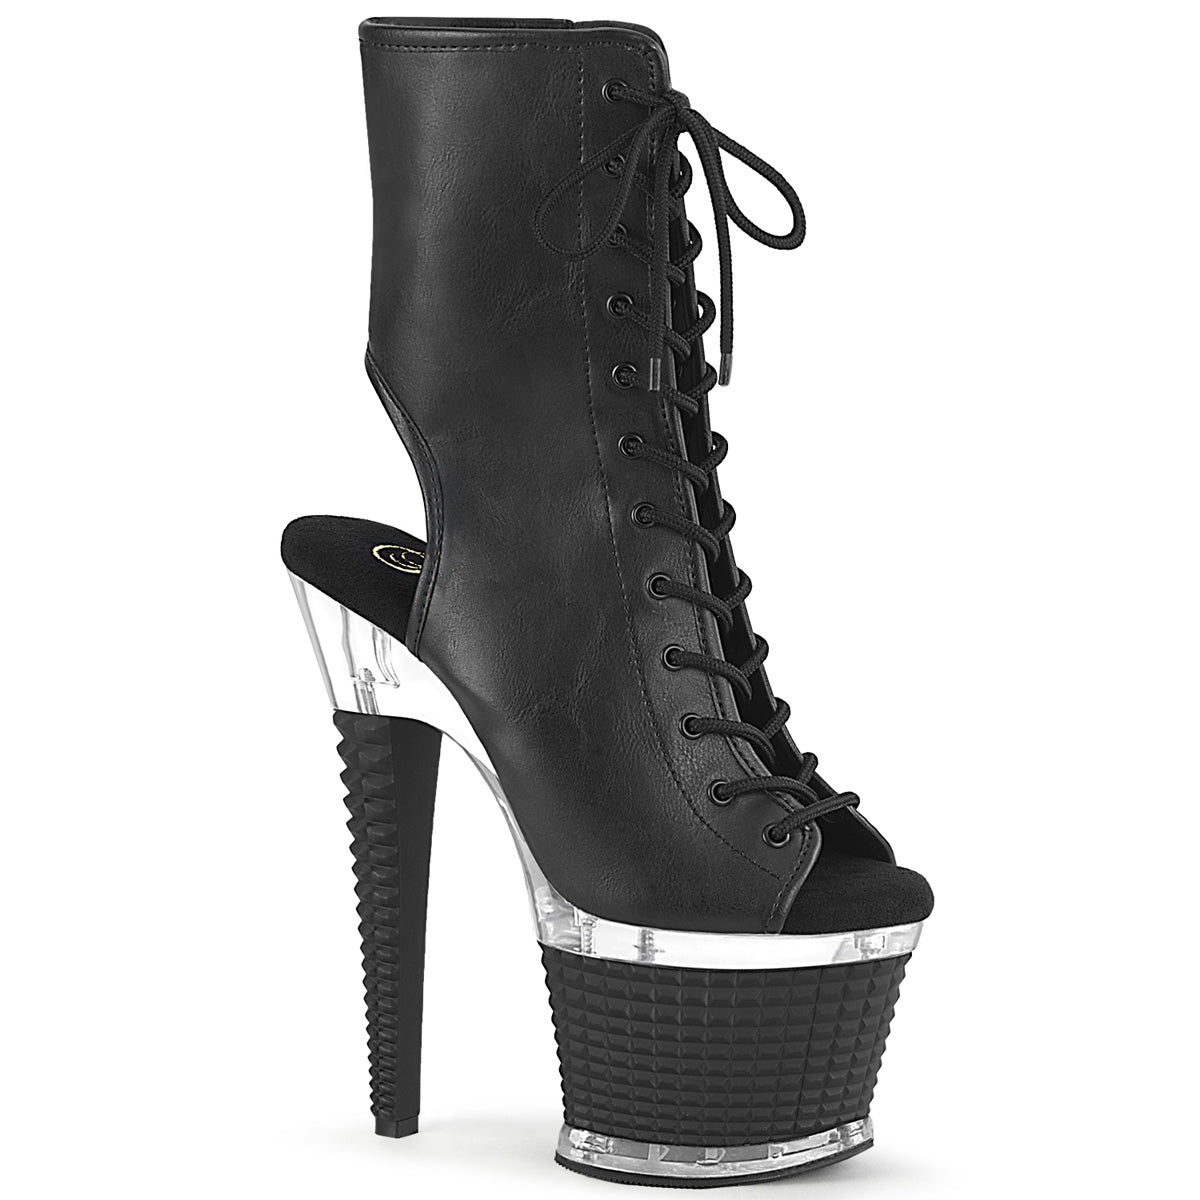 SPECTATOR-1016 Black Ankle Boots